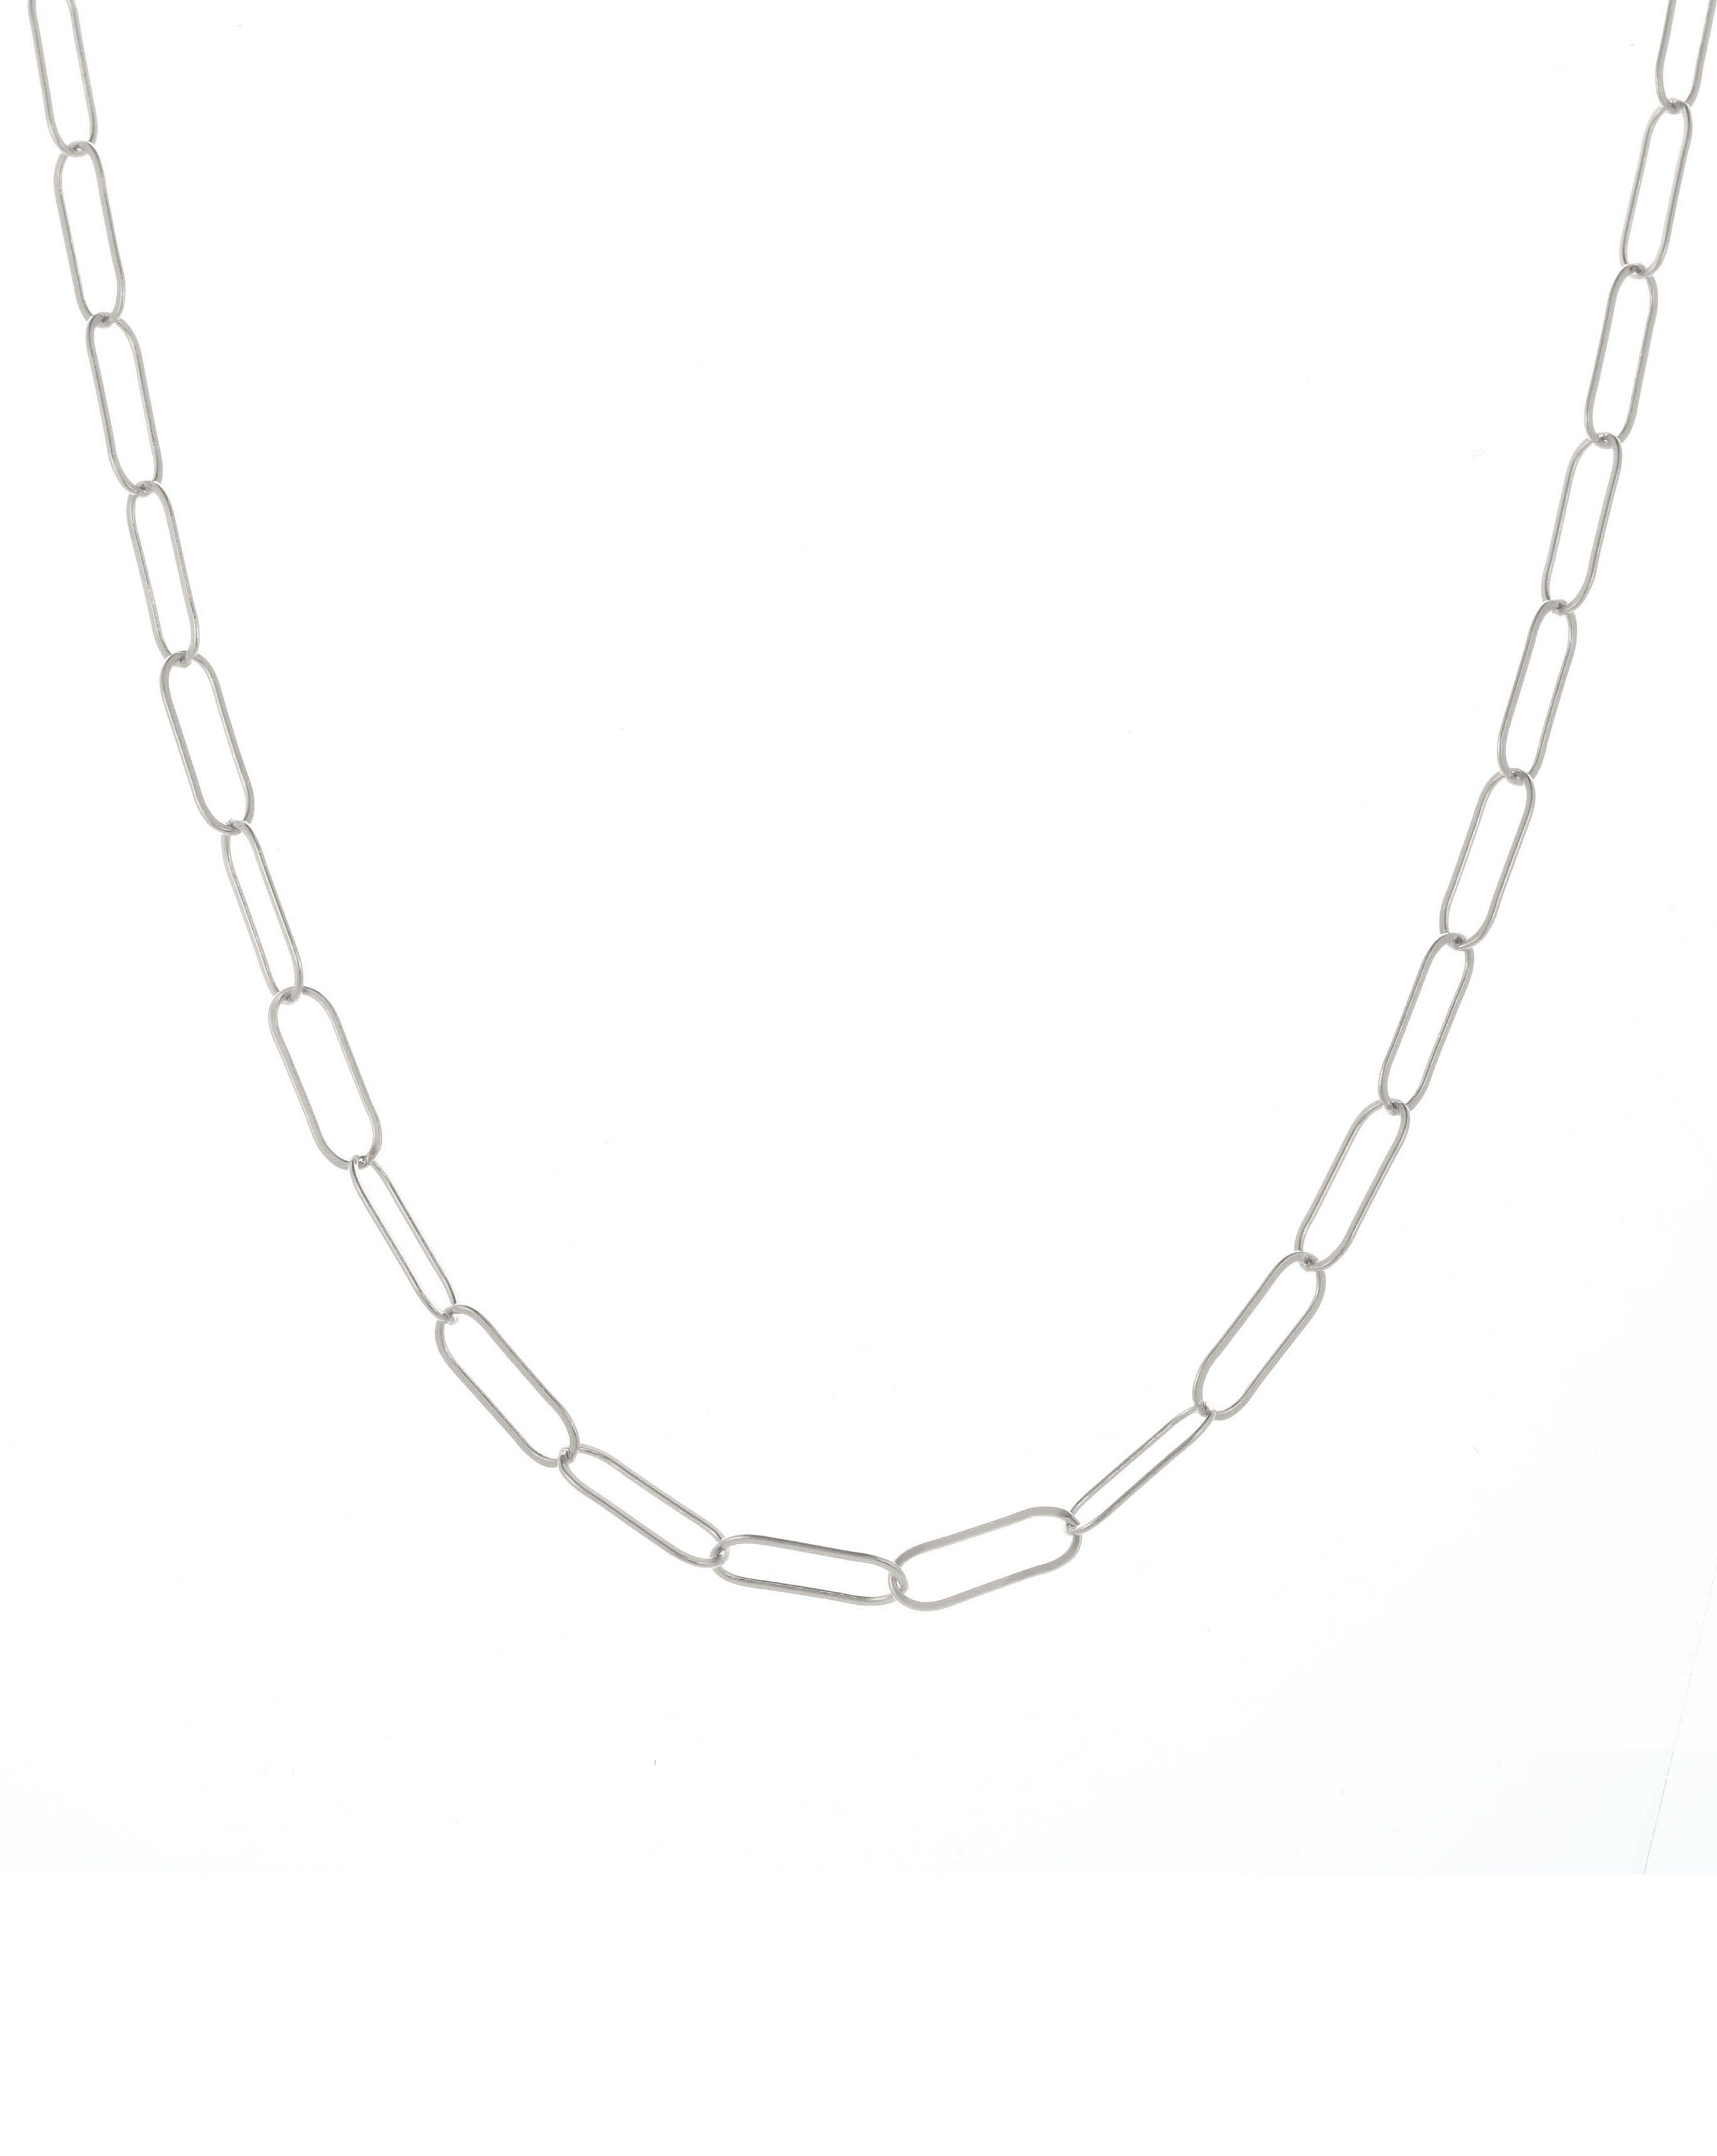 Muse Chain Necklace by KOZAKH. A 14 to 16 inch adjustable length, flat oval link chain necklace, crafted in Sterling Silver. 